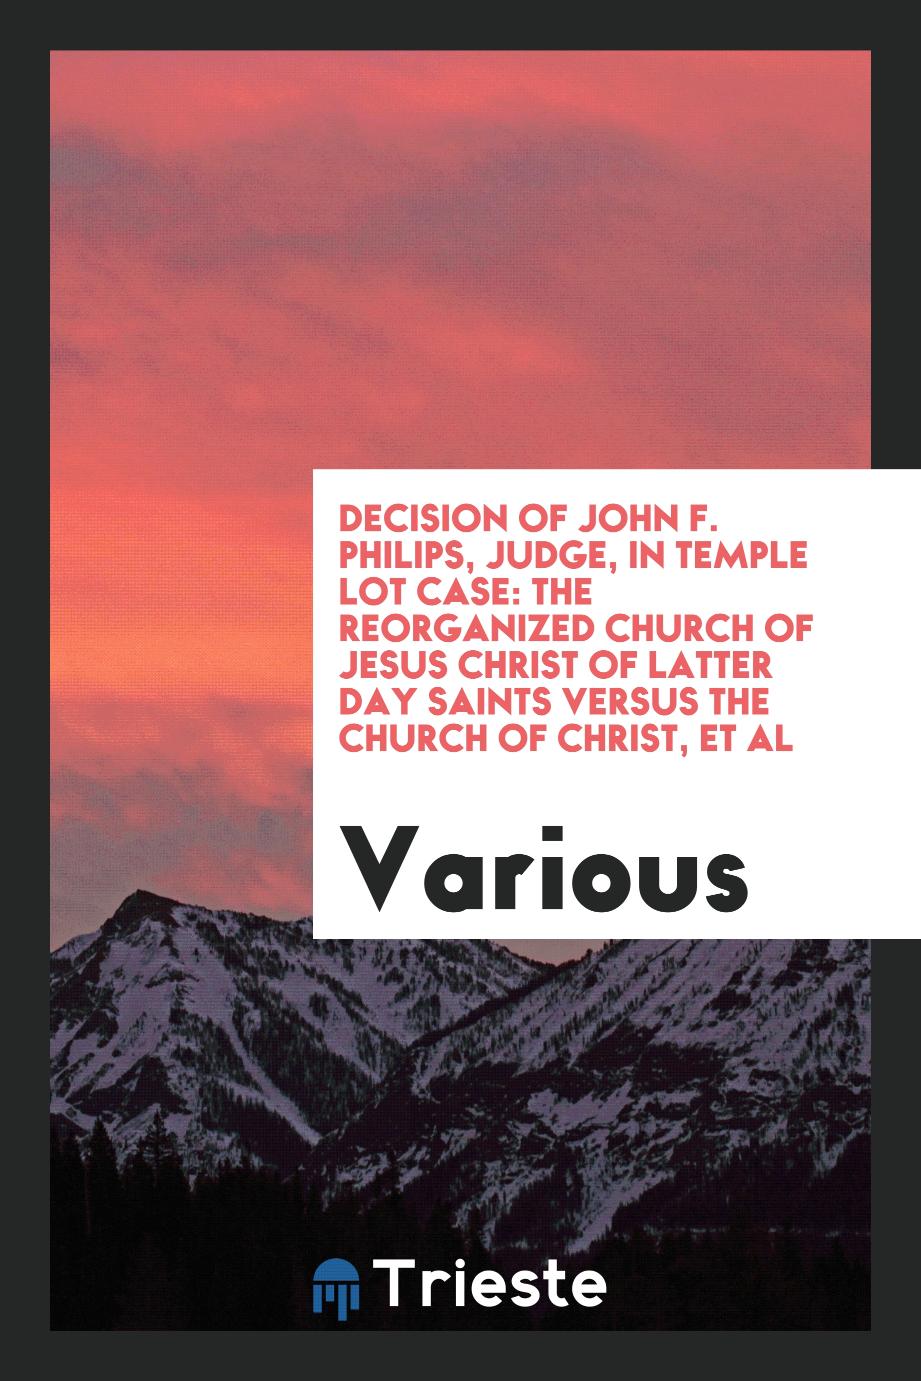 Decision of John F. Philips, judge, in Temple Lot case: the Reorganized Church of Jesus Christ of Latter Day Saints versus the Church of Christ, et al